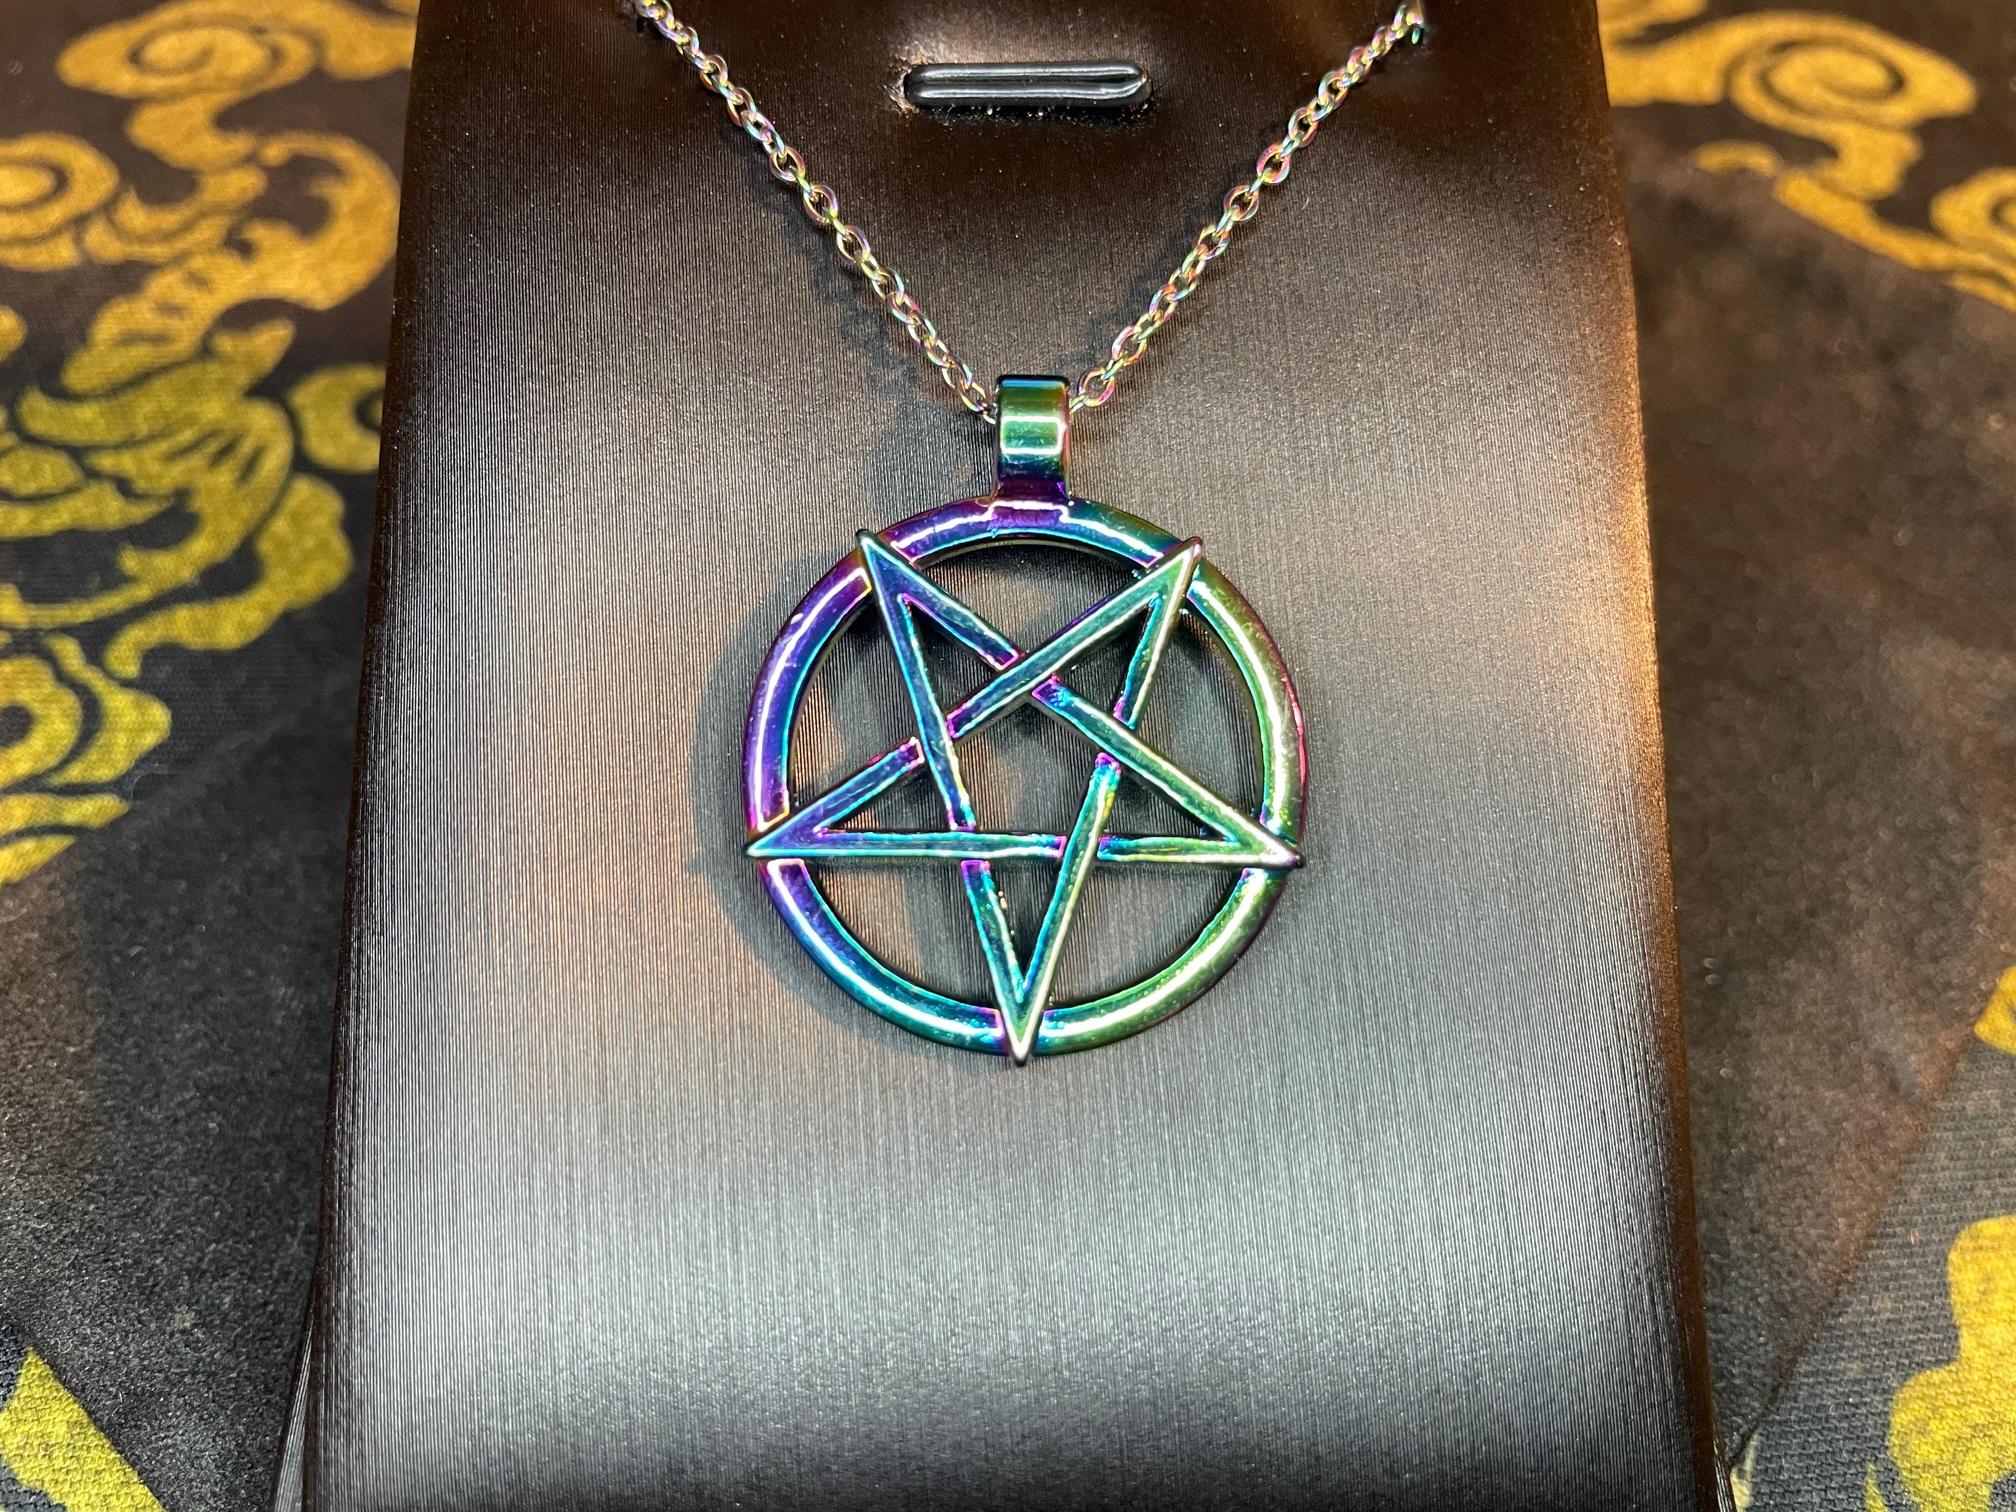 inverted pentagram circle rainbow stainless steel pendant necklace satanic wiccan pagan church temple jewelry prism